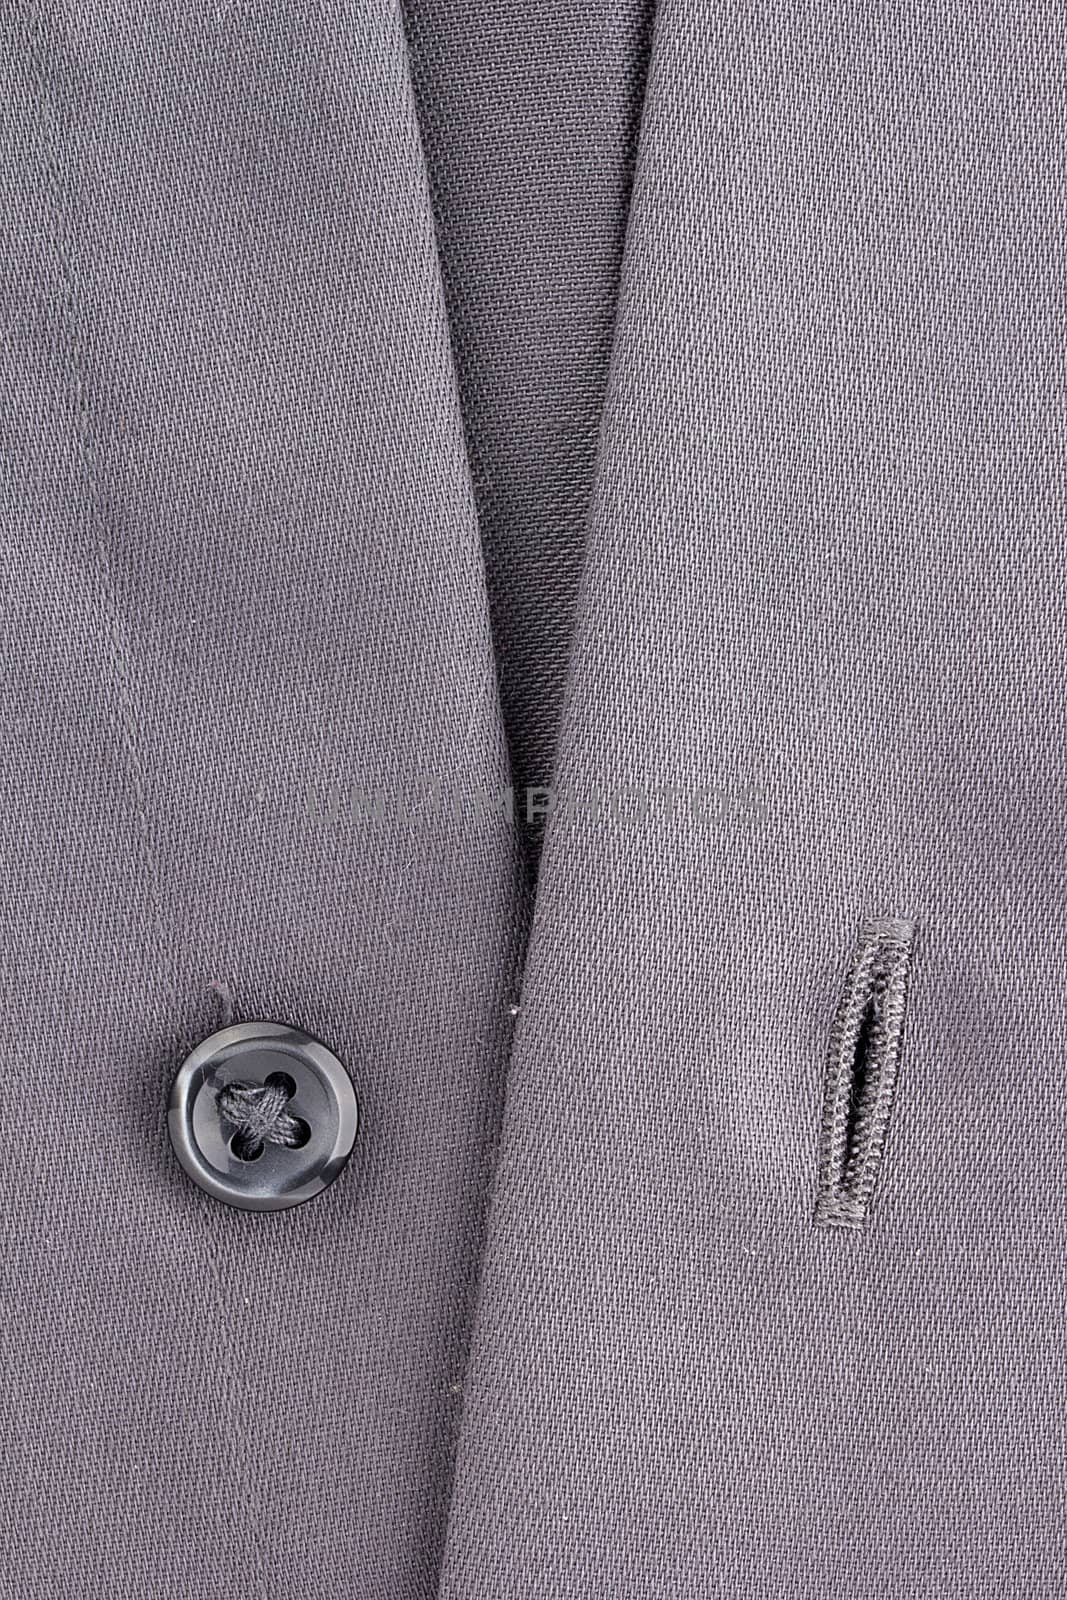 Close-up photograph of a black button on gray material.